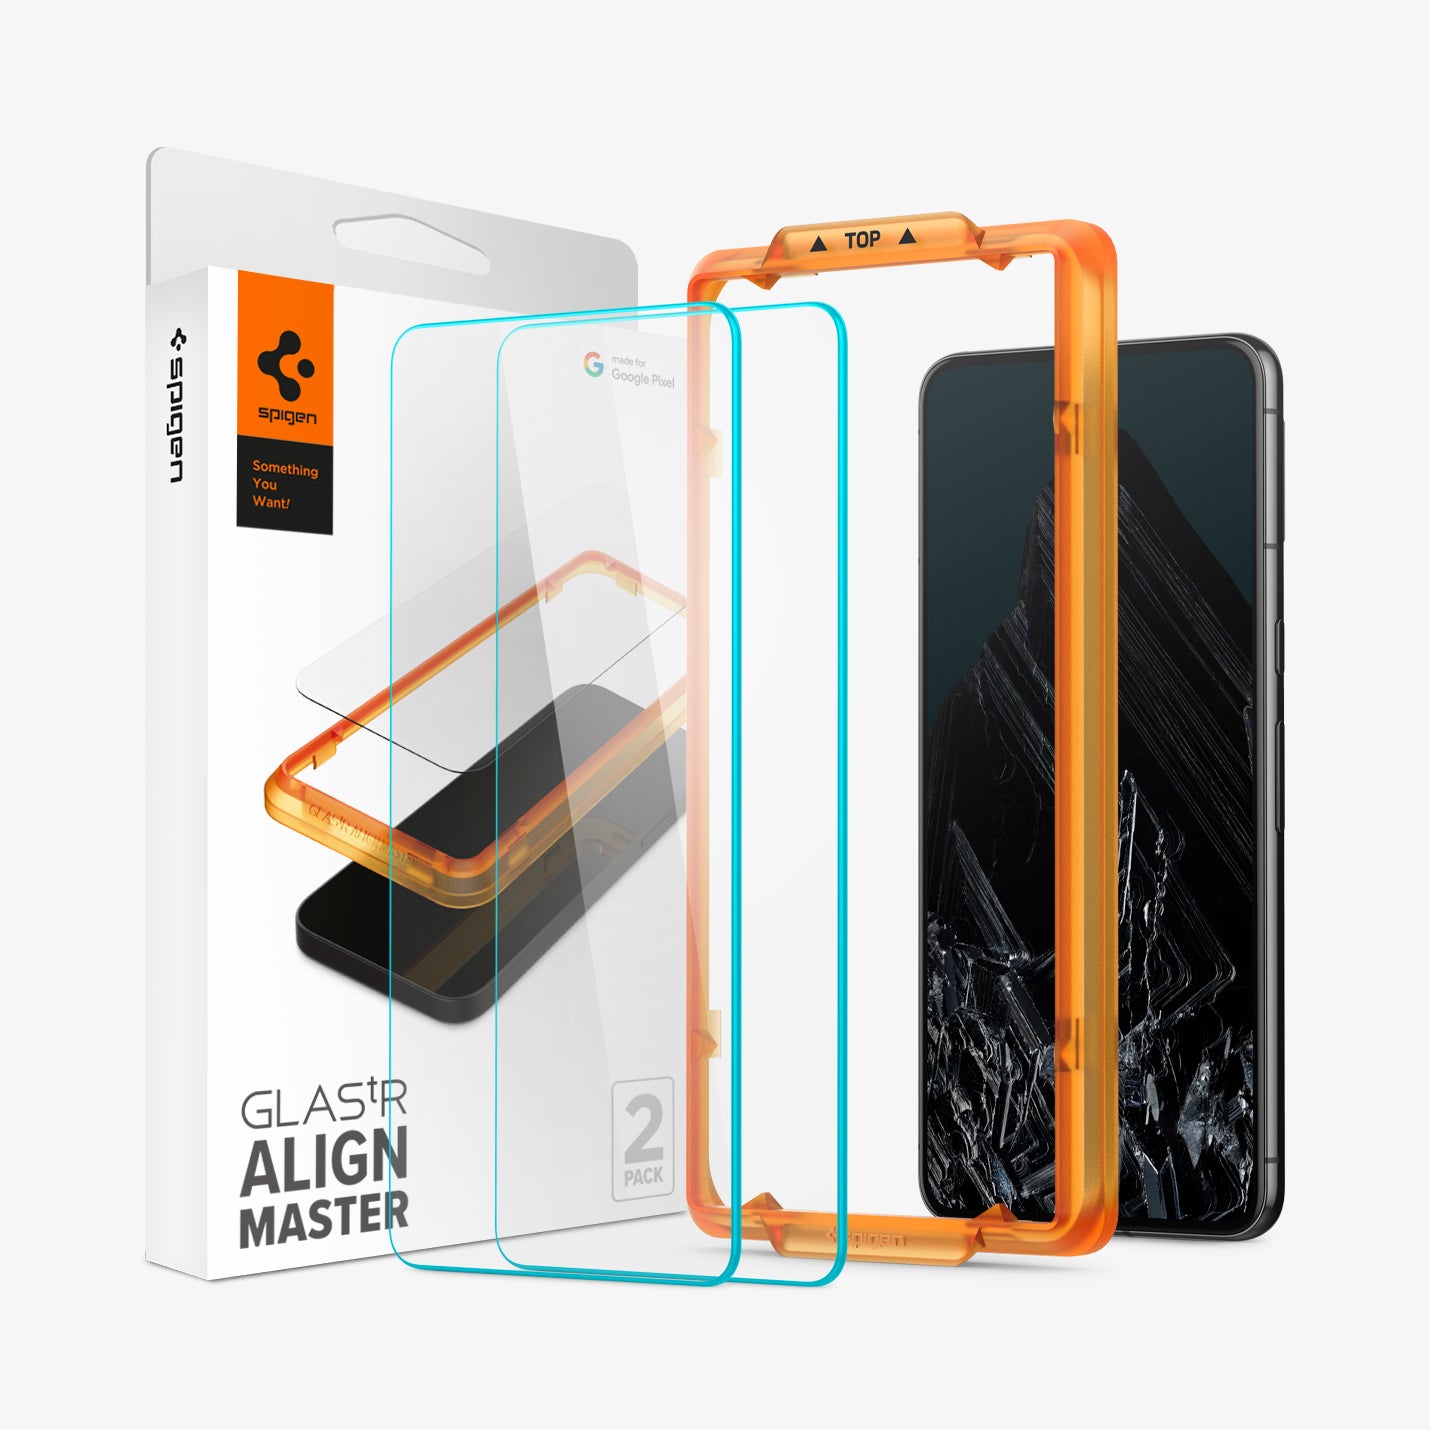 AGL07395 - Pixel 8 Pro Alignmaster in Clear showing the tempered glass aligning with another tempered glass, the alignment tray and a device beside it, is the packaging